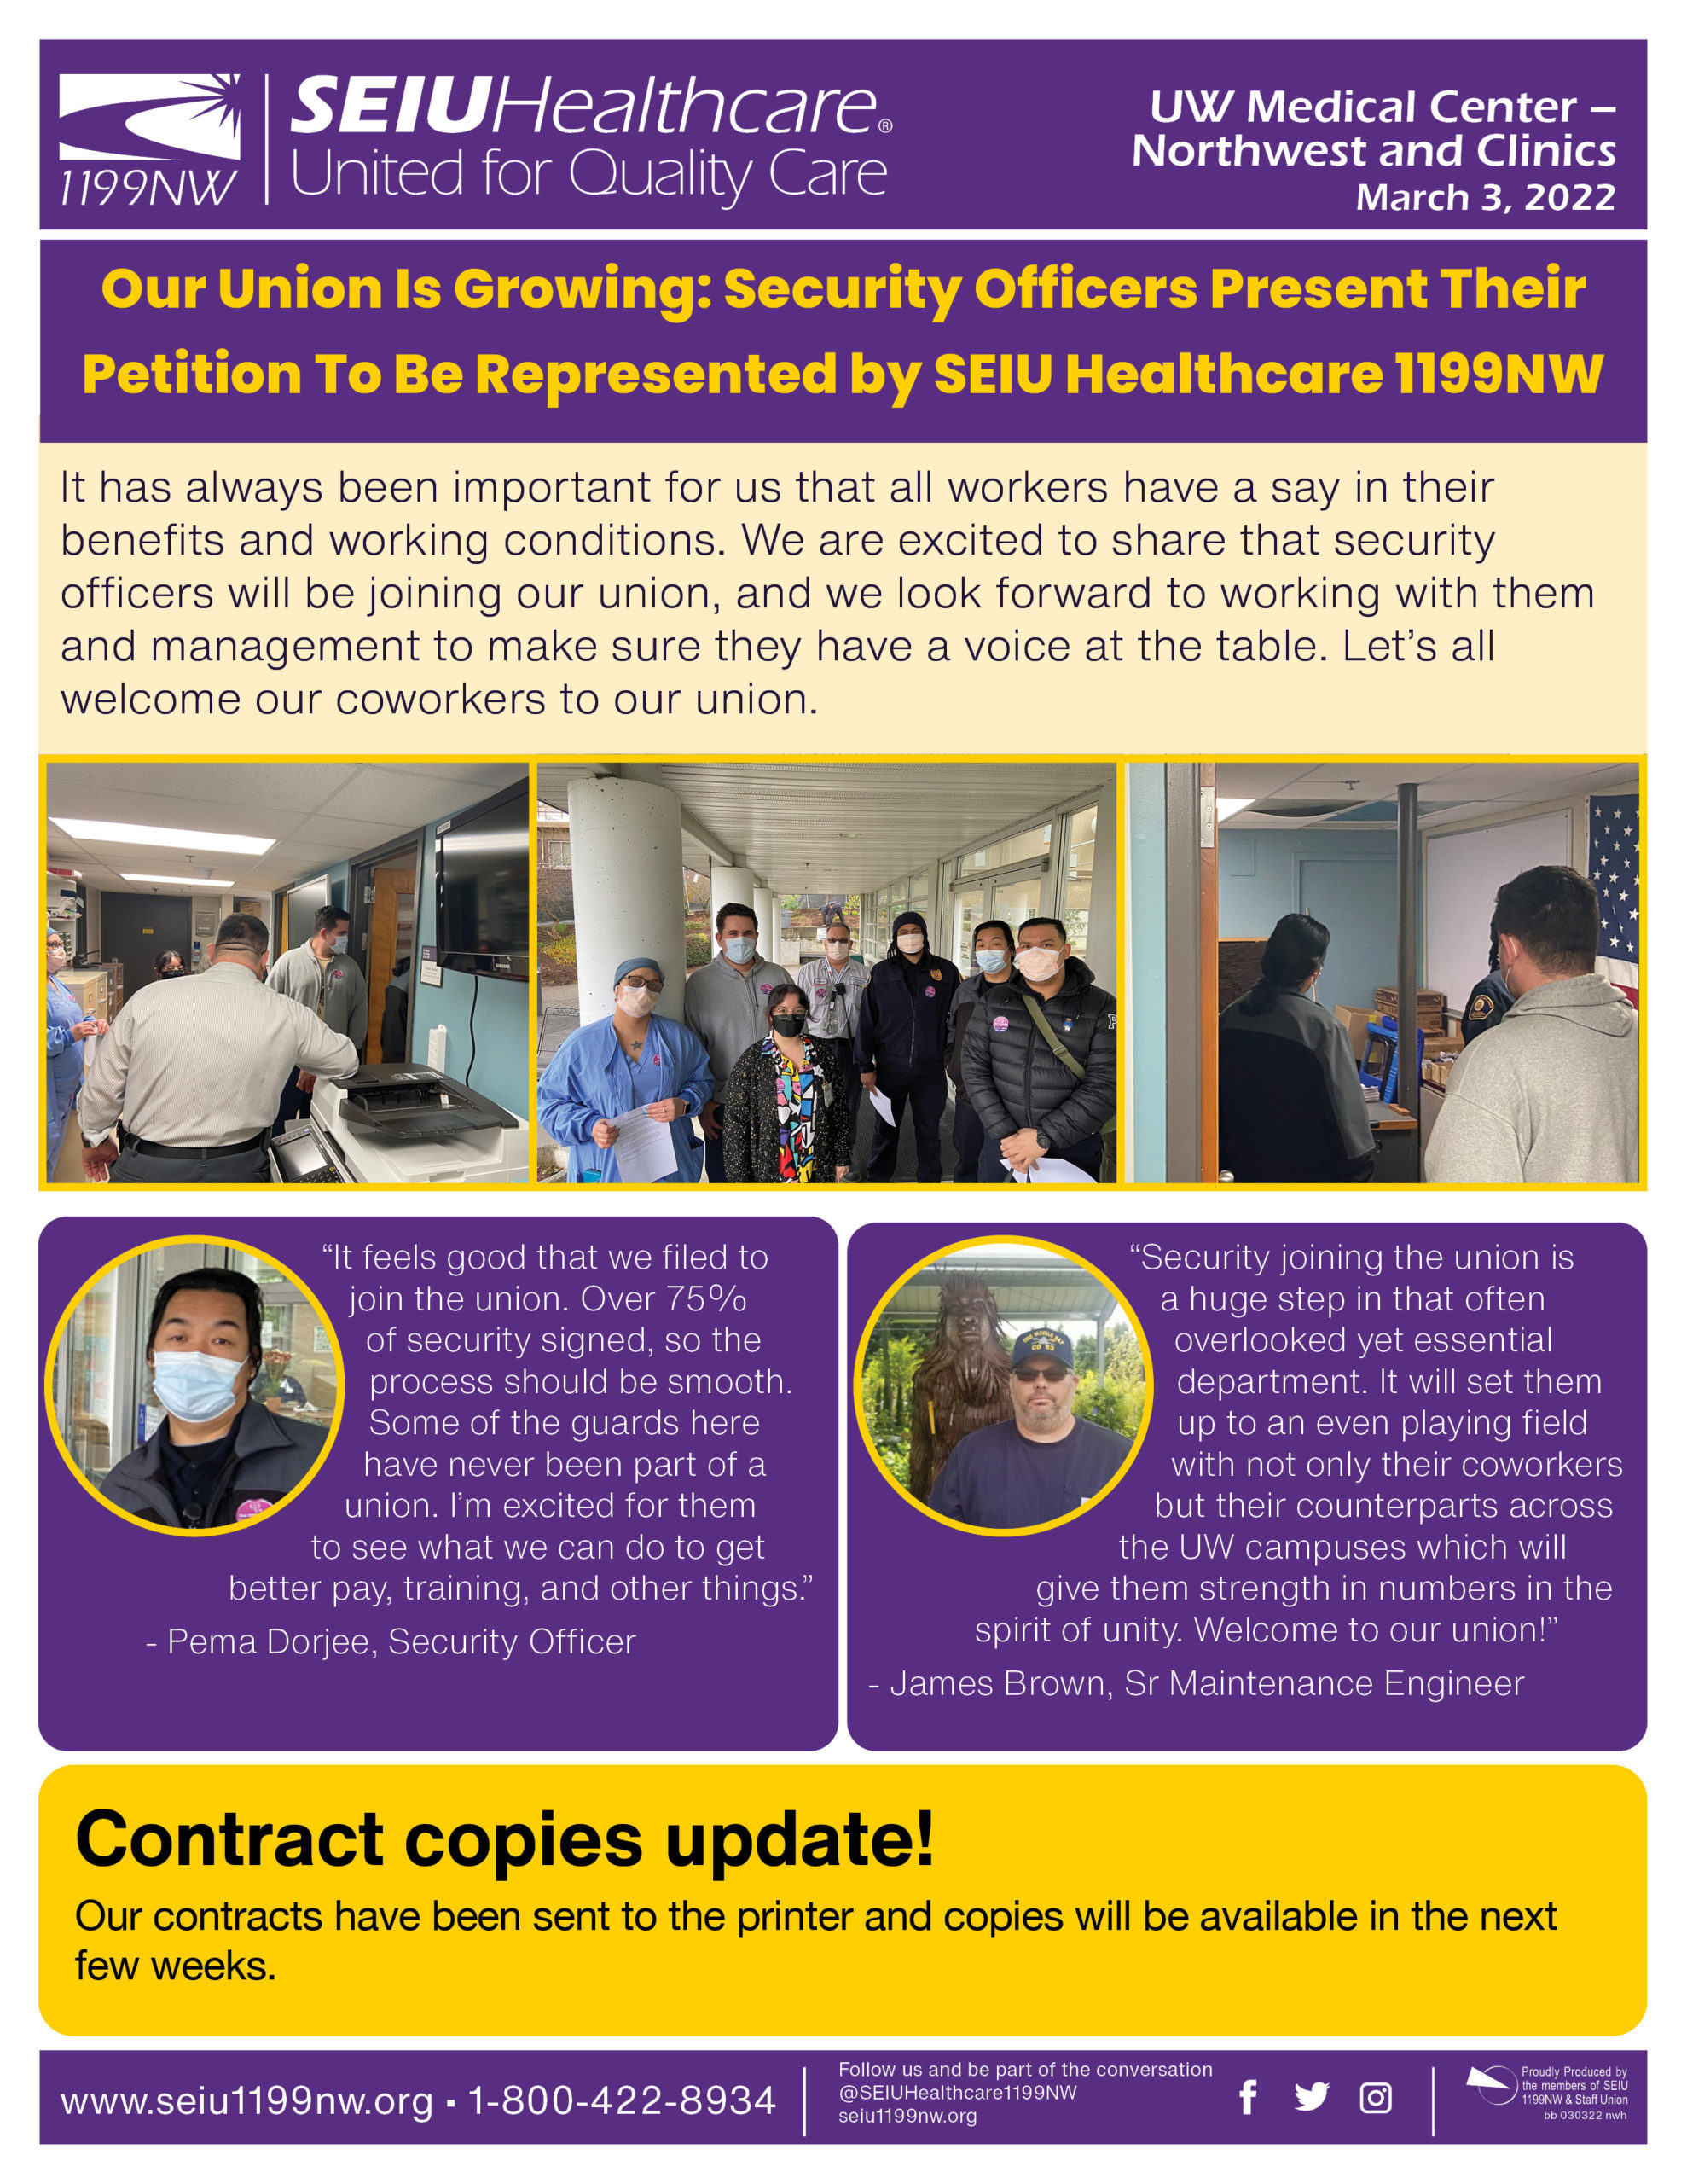 Our Union Is Growing: Security Officers Present Their Petition To Be Represented by SEIU Healthcare 1199NW